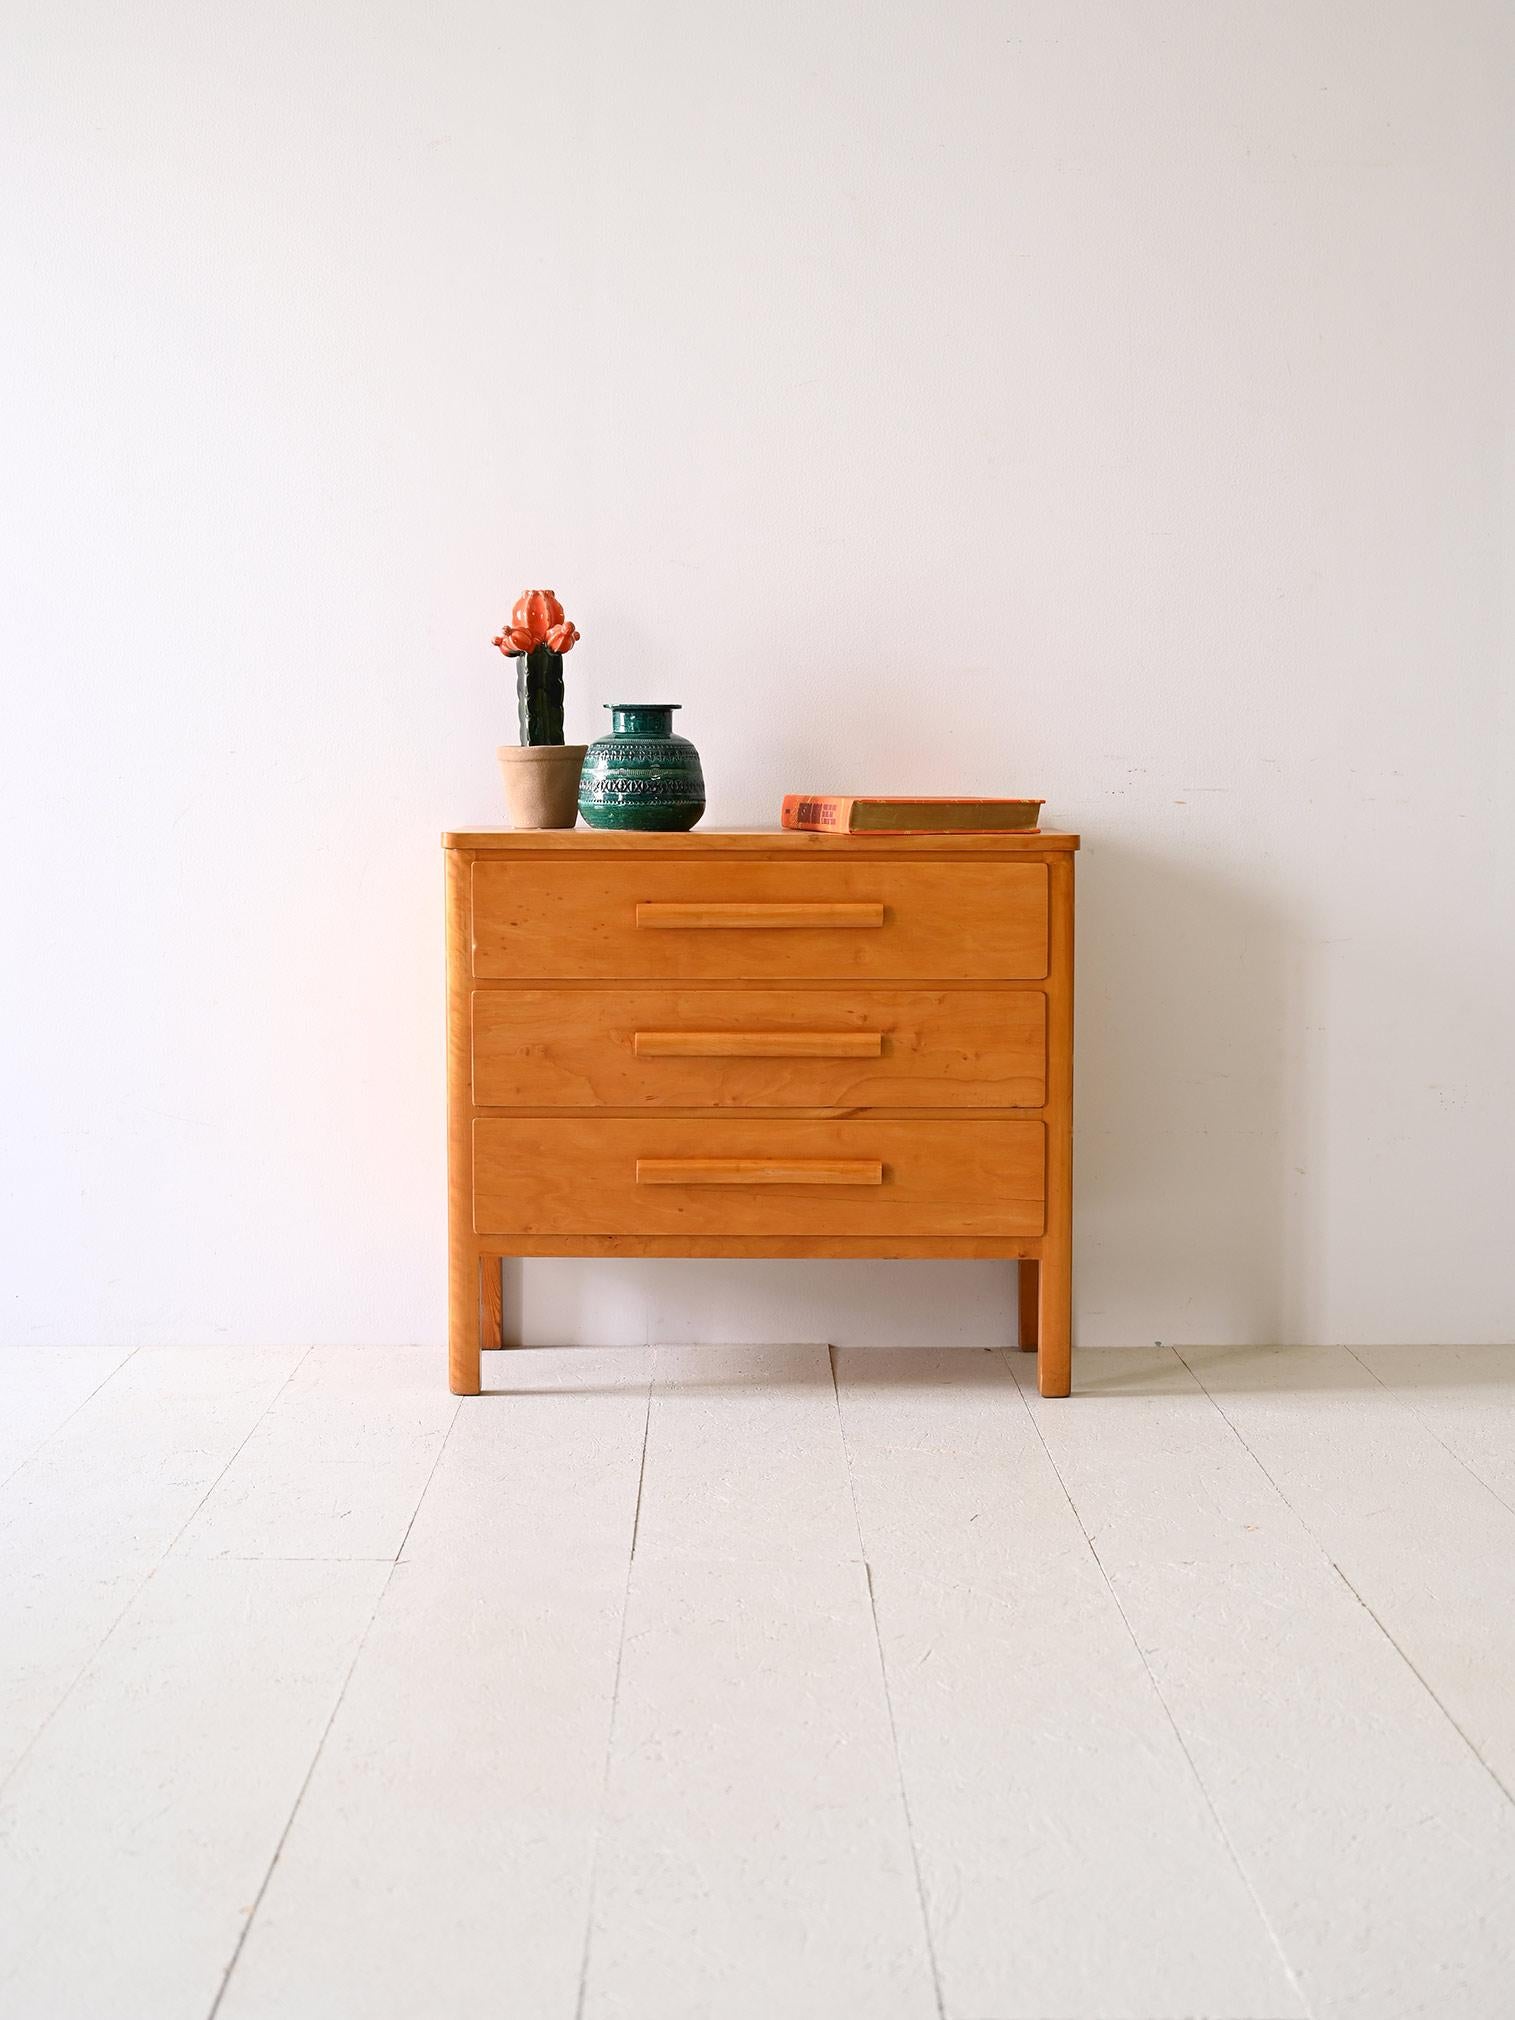 Original vintage 1960s Nordic chest of drawers.

This birch wood chest of drawers is an elegant fusion of Nordic design and practical functionality. Its solid construction features squared legs that recall classic mid-century style, lending a touch